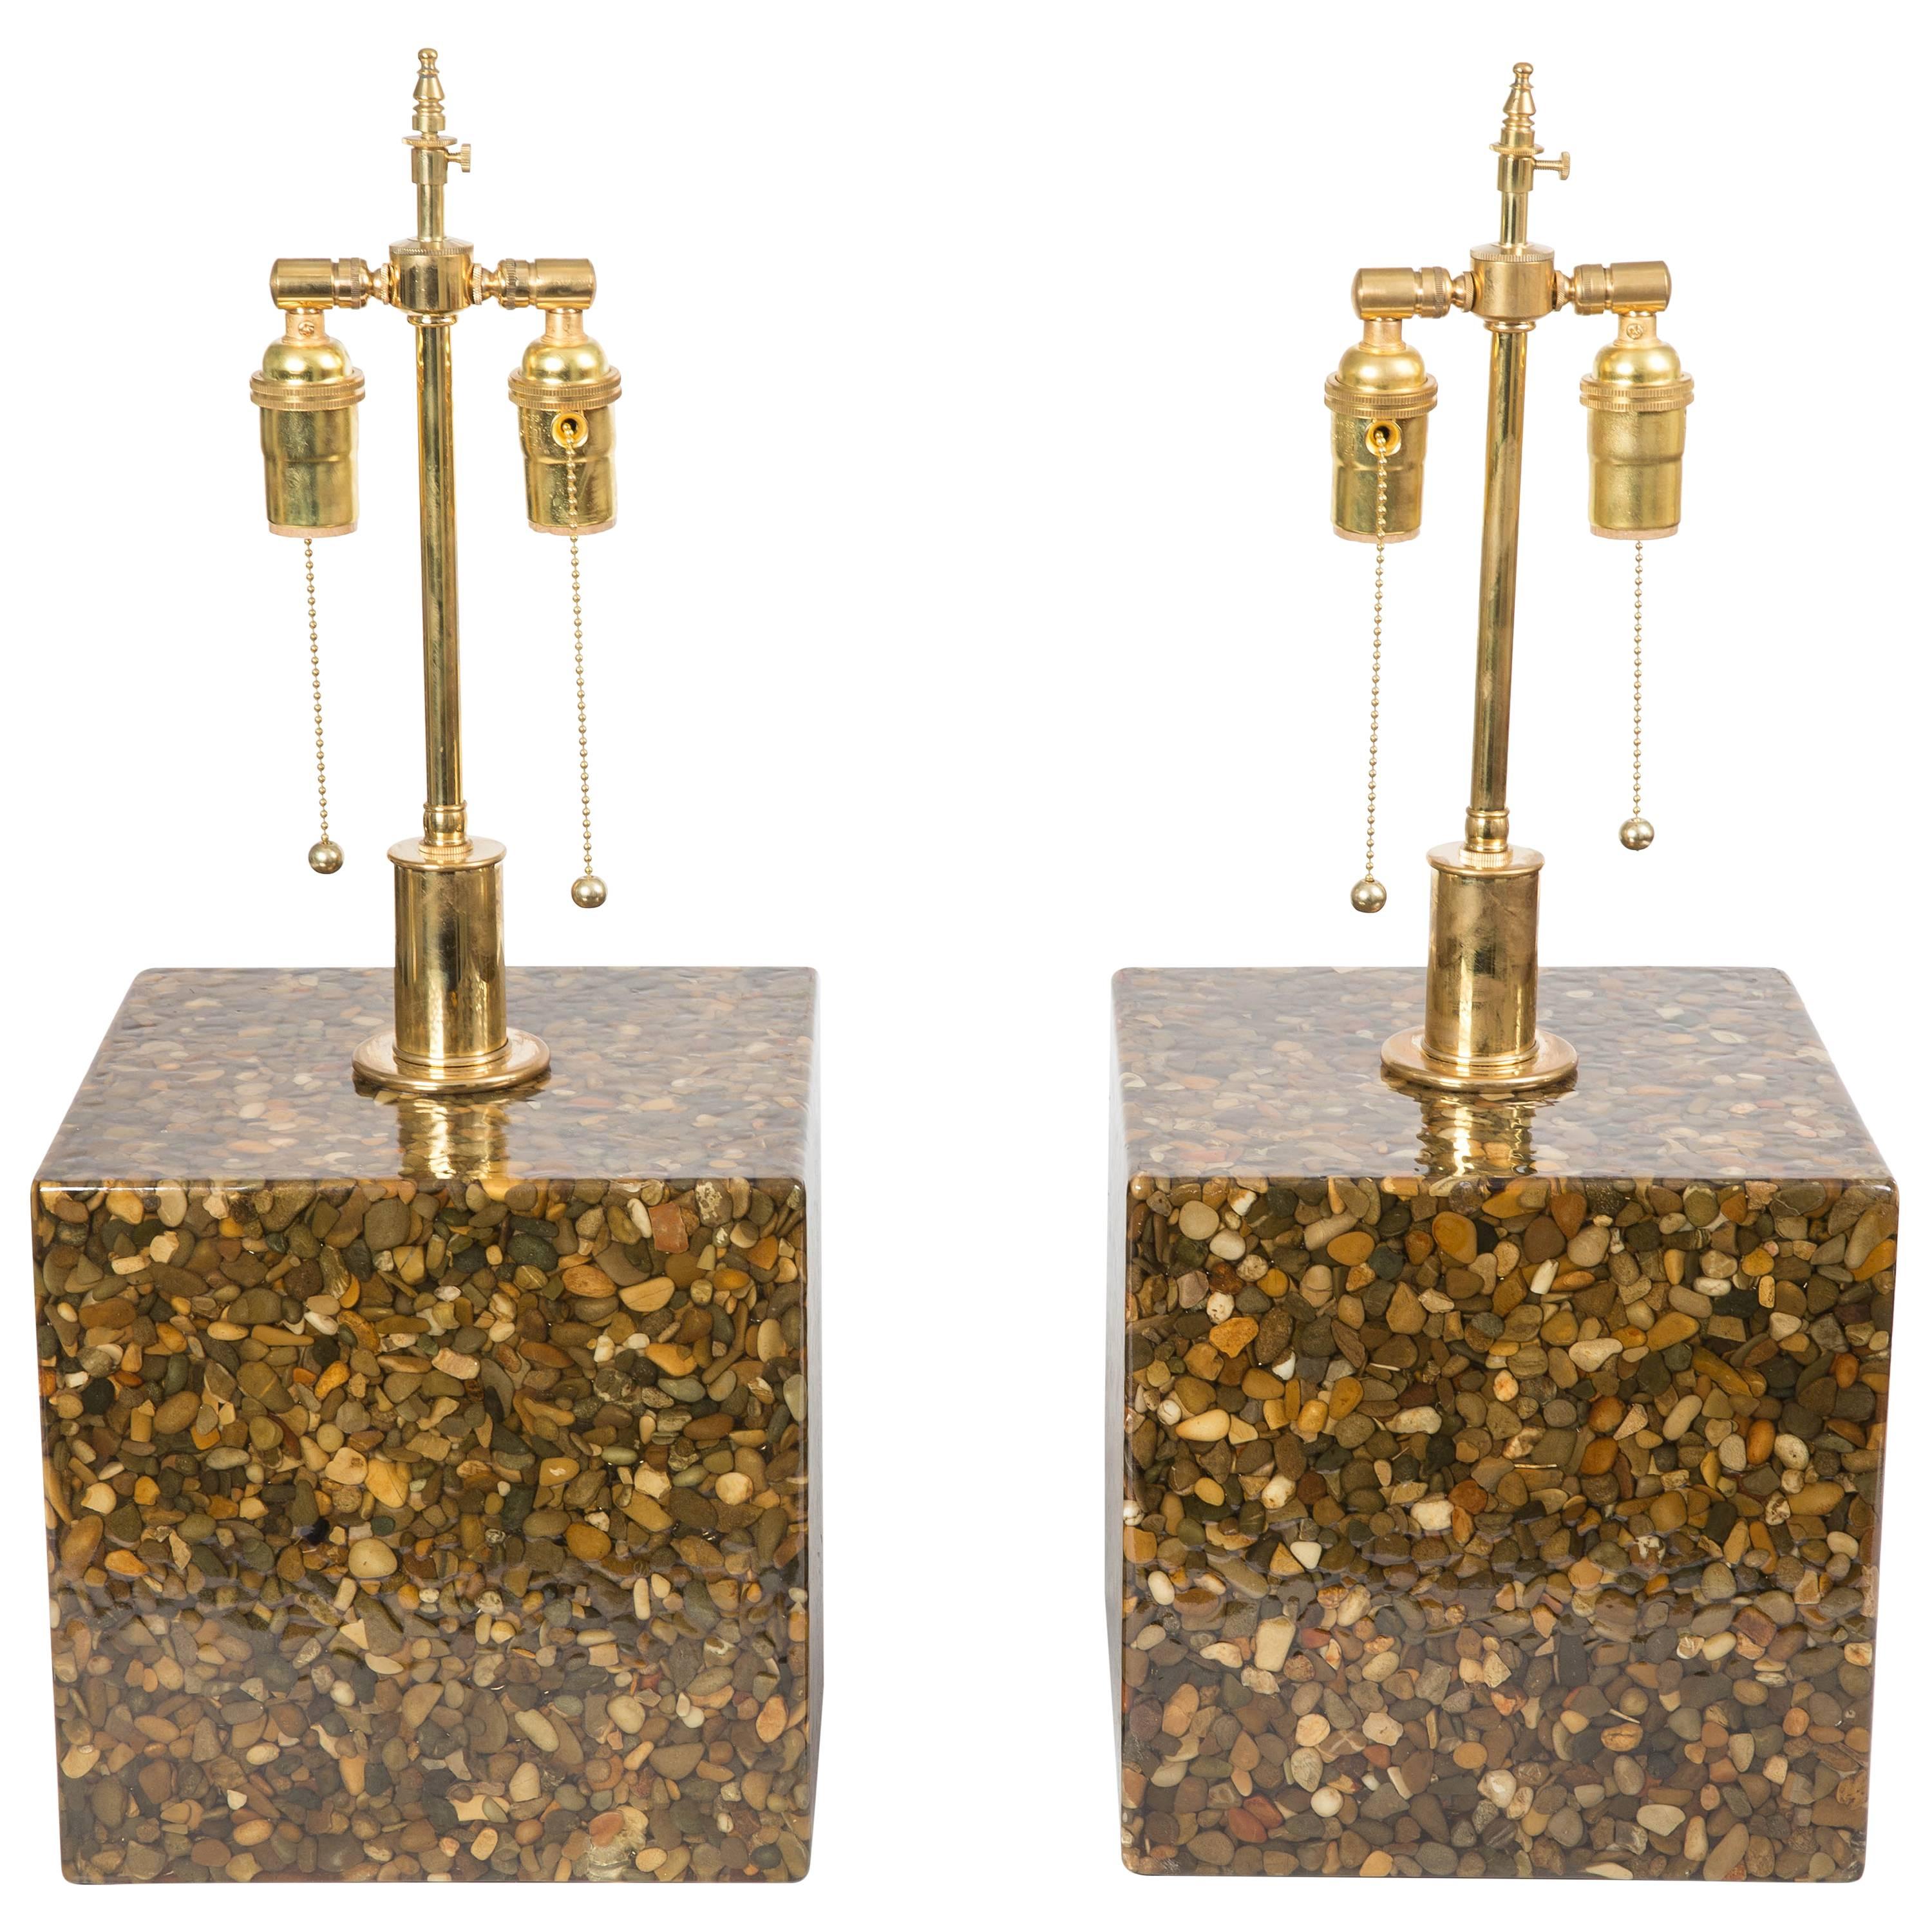 Pair of Cubic Resin and Pebble Lamps with Brass Hardware